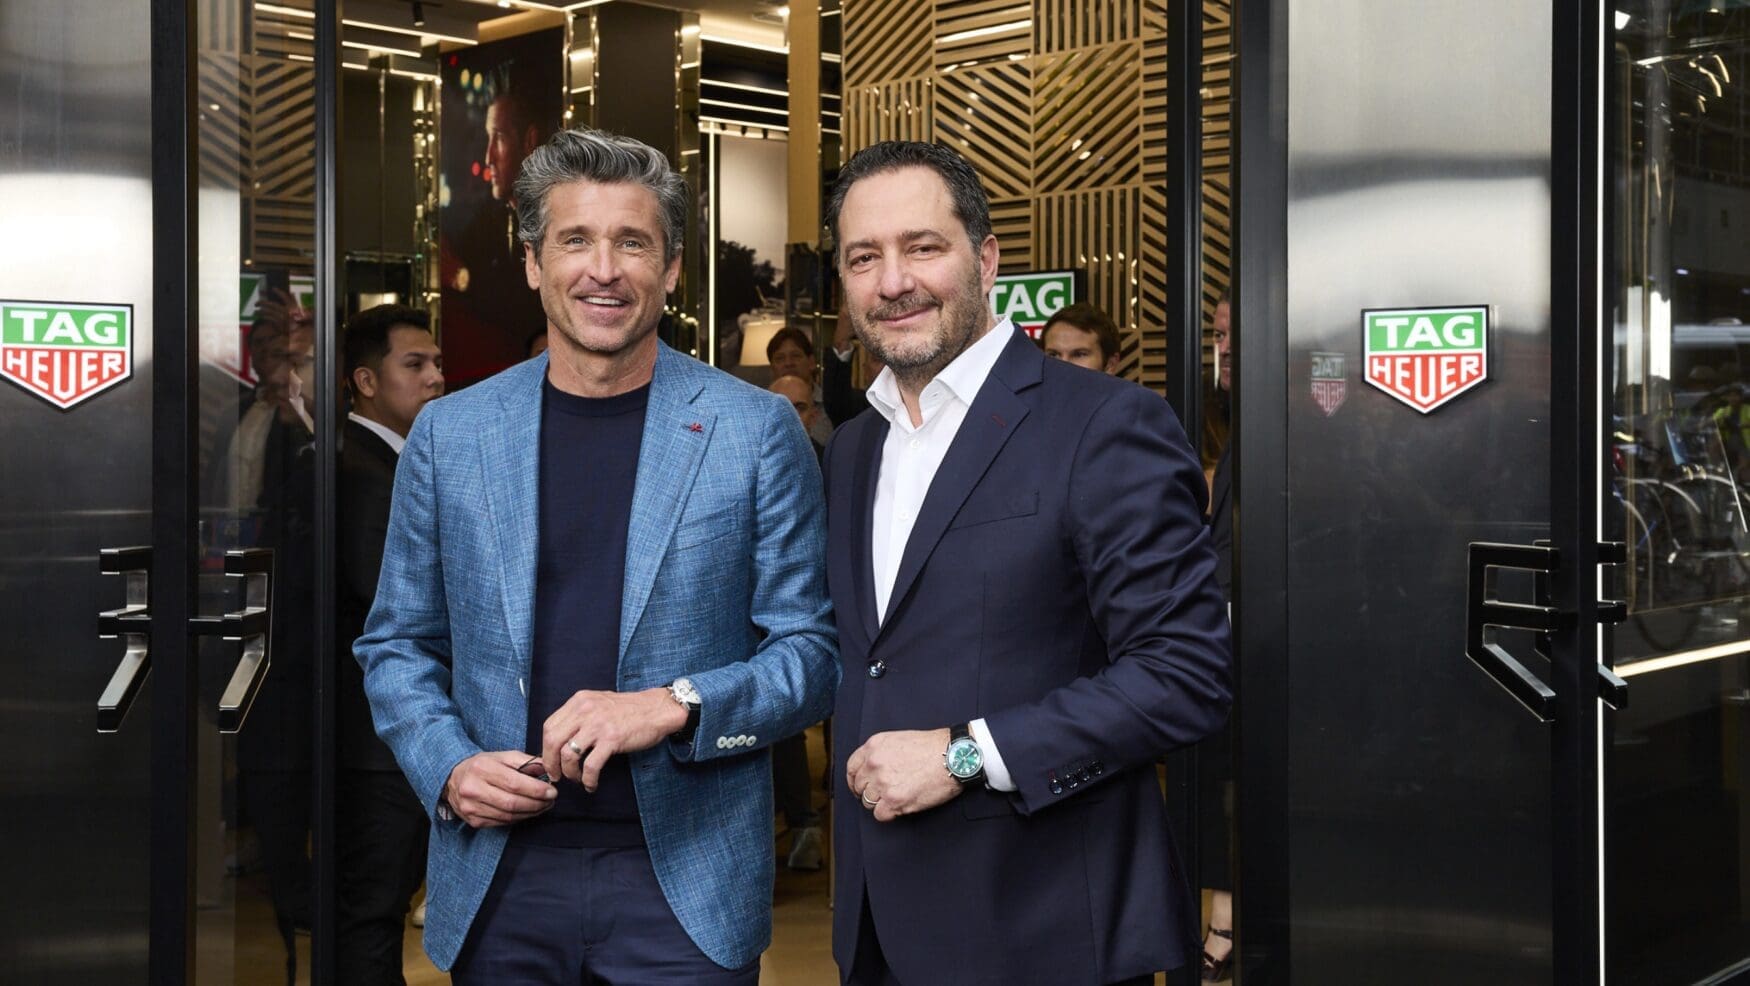 Patrick Dempsey & Julien Tornare reopened TAG Heuer’s Sydney flagship in dramatic style